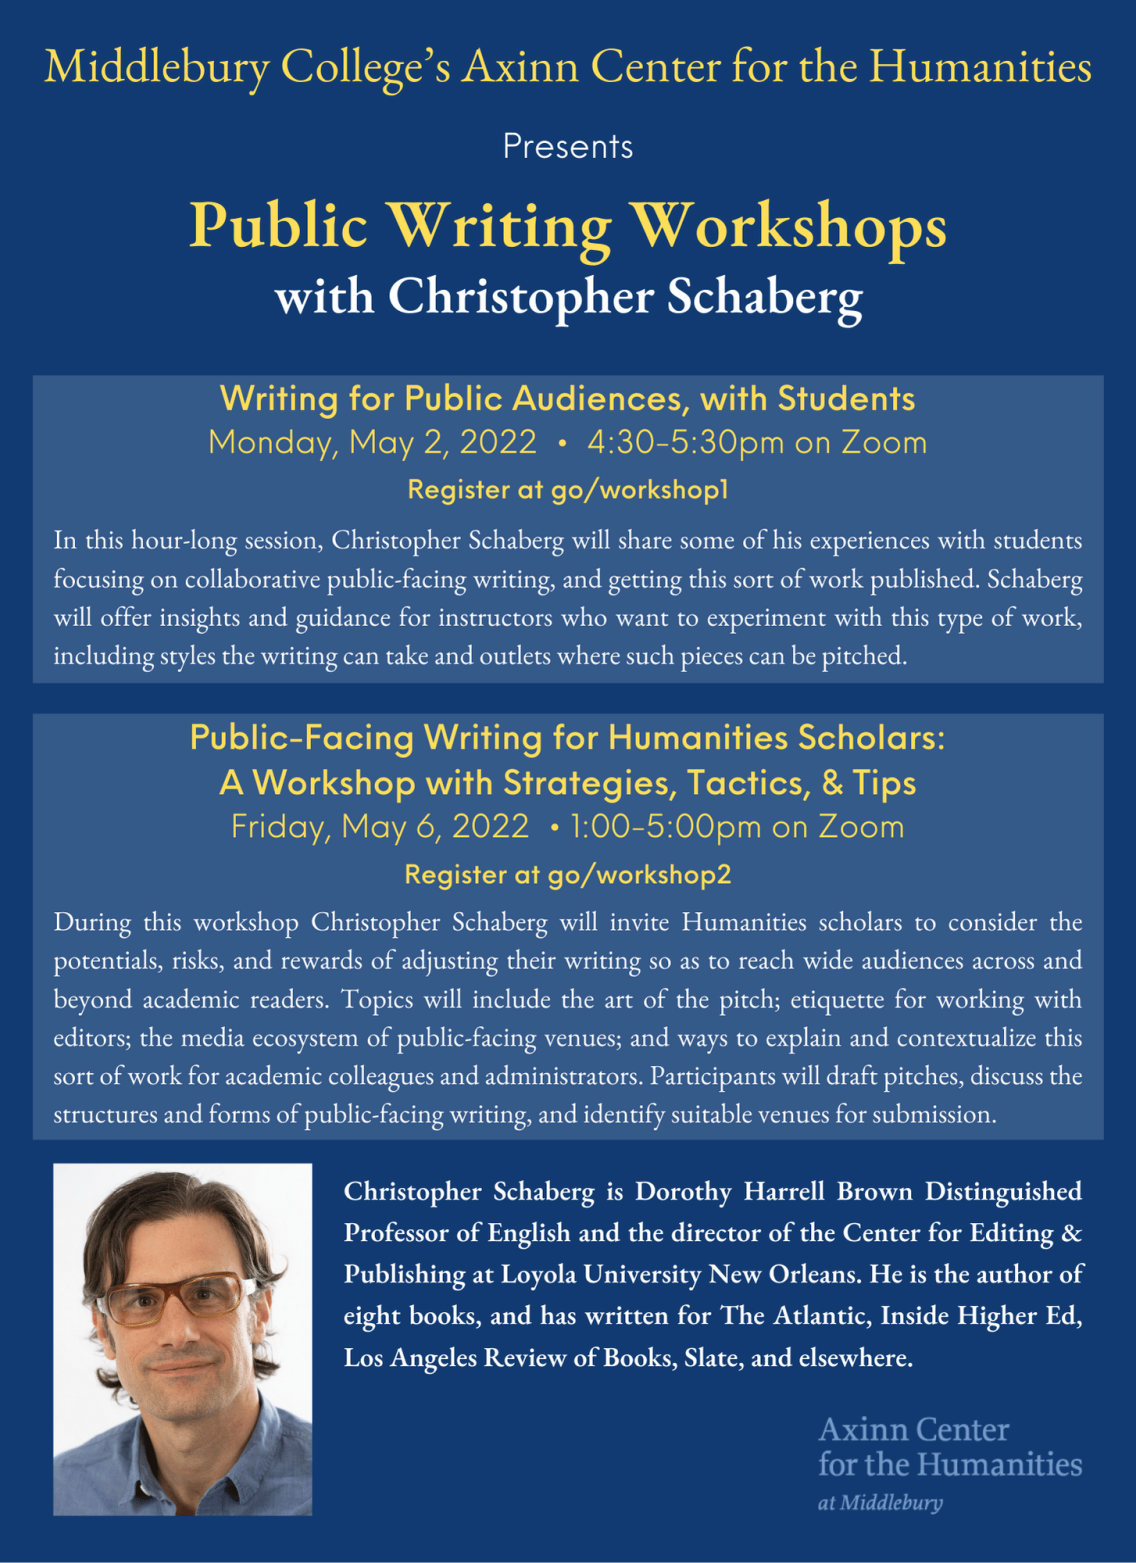 Poster for Public Writing Workshops with Christopher Schaberg